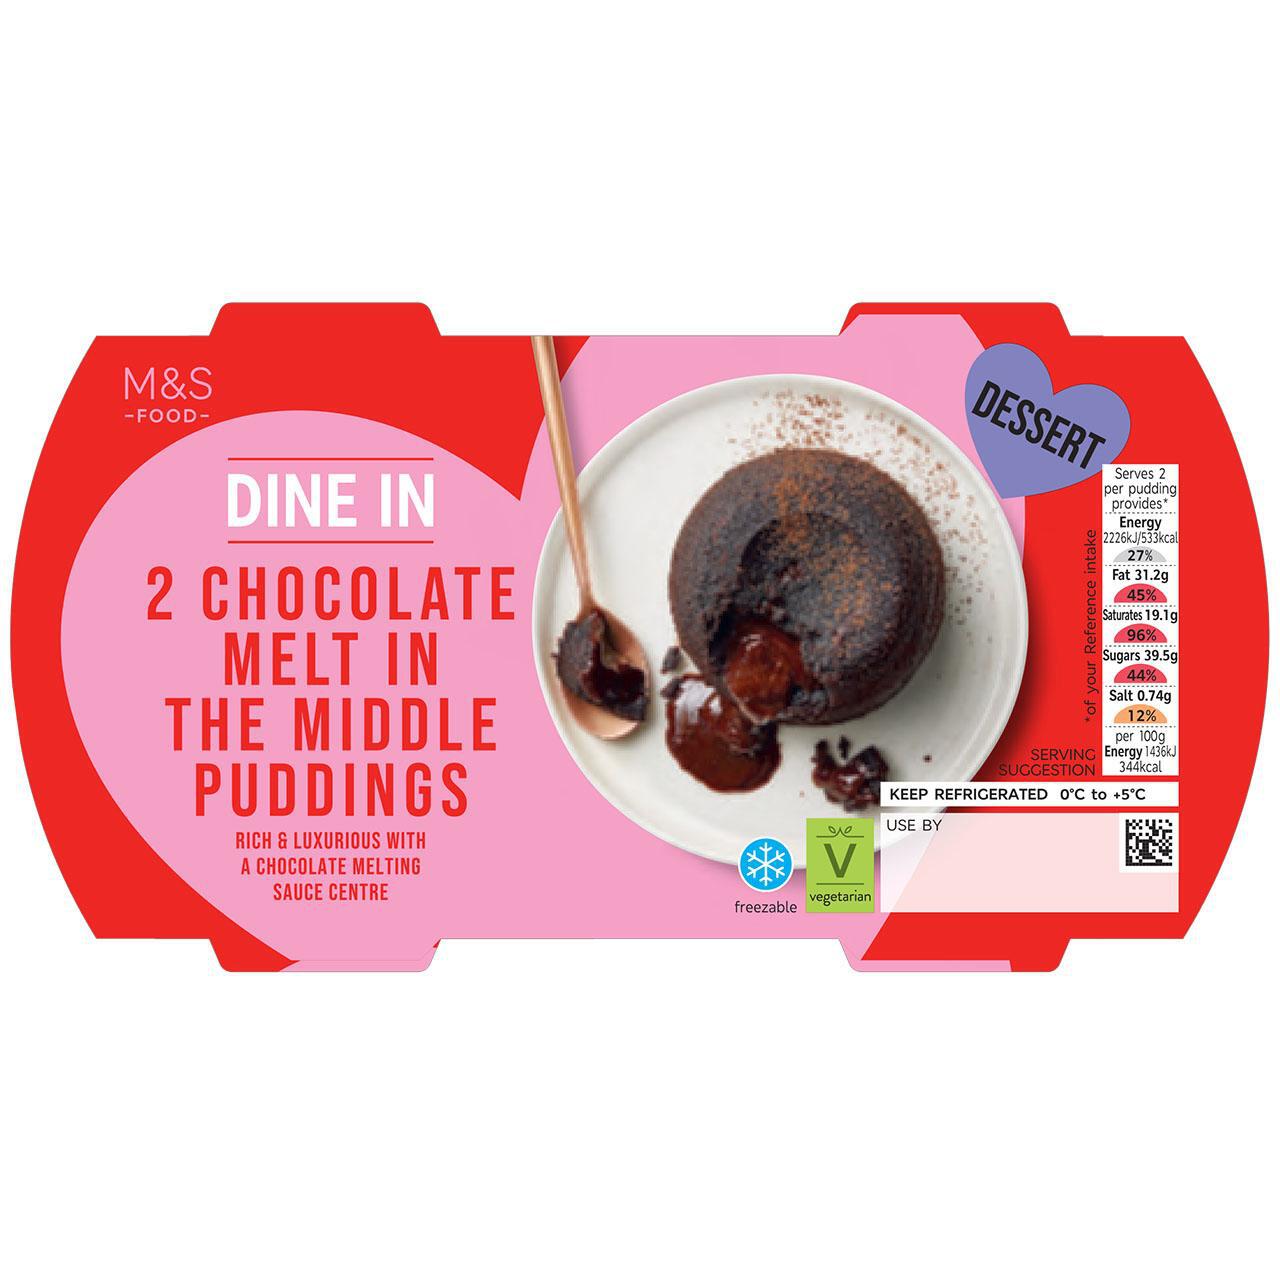 M&S 2 Chocolate Melt in the Middle Puddings 310g